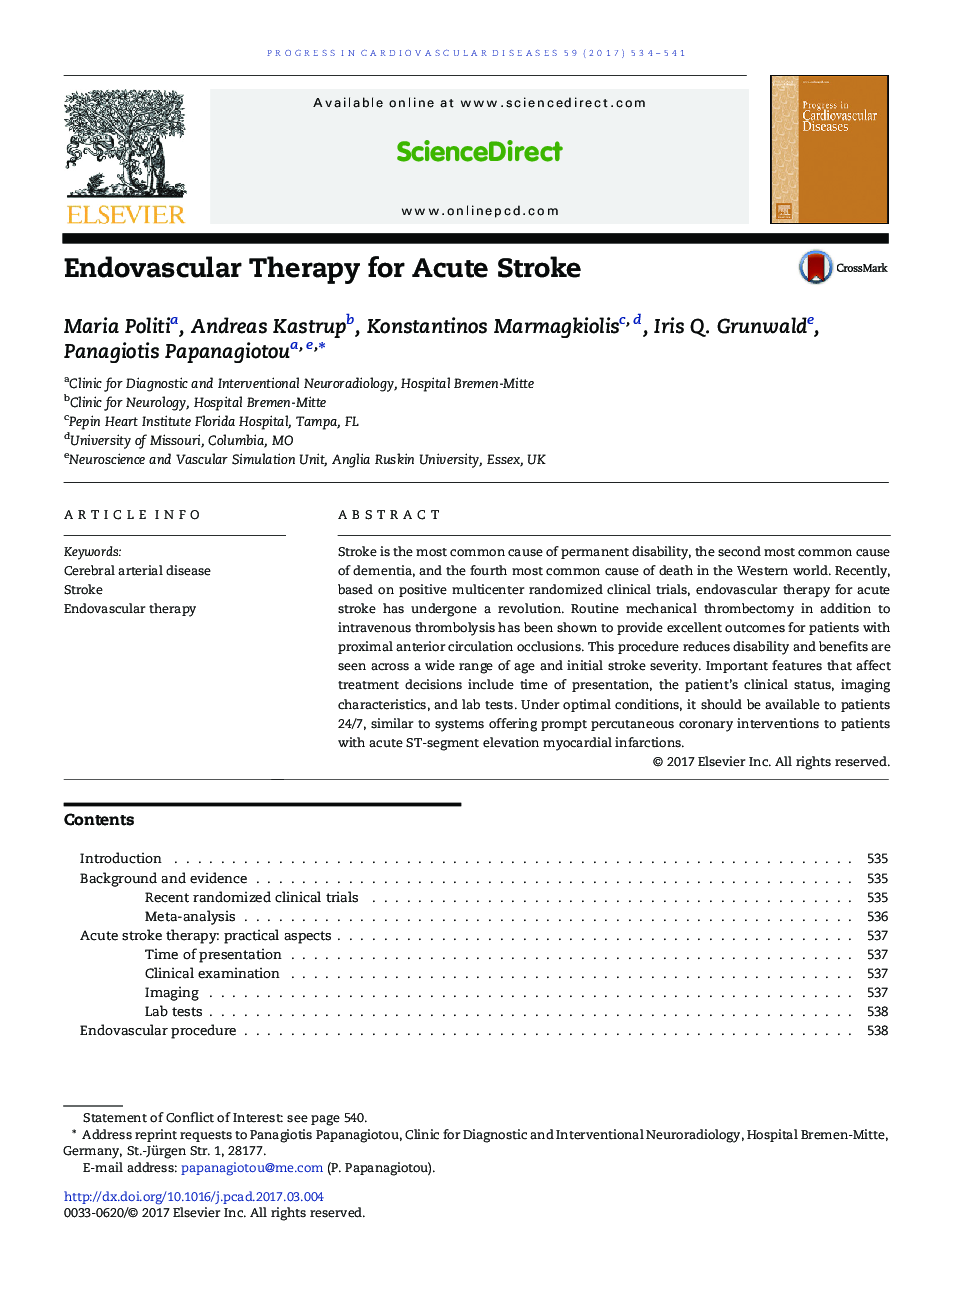 Endovascular Therapy for Acute Stroke